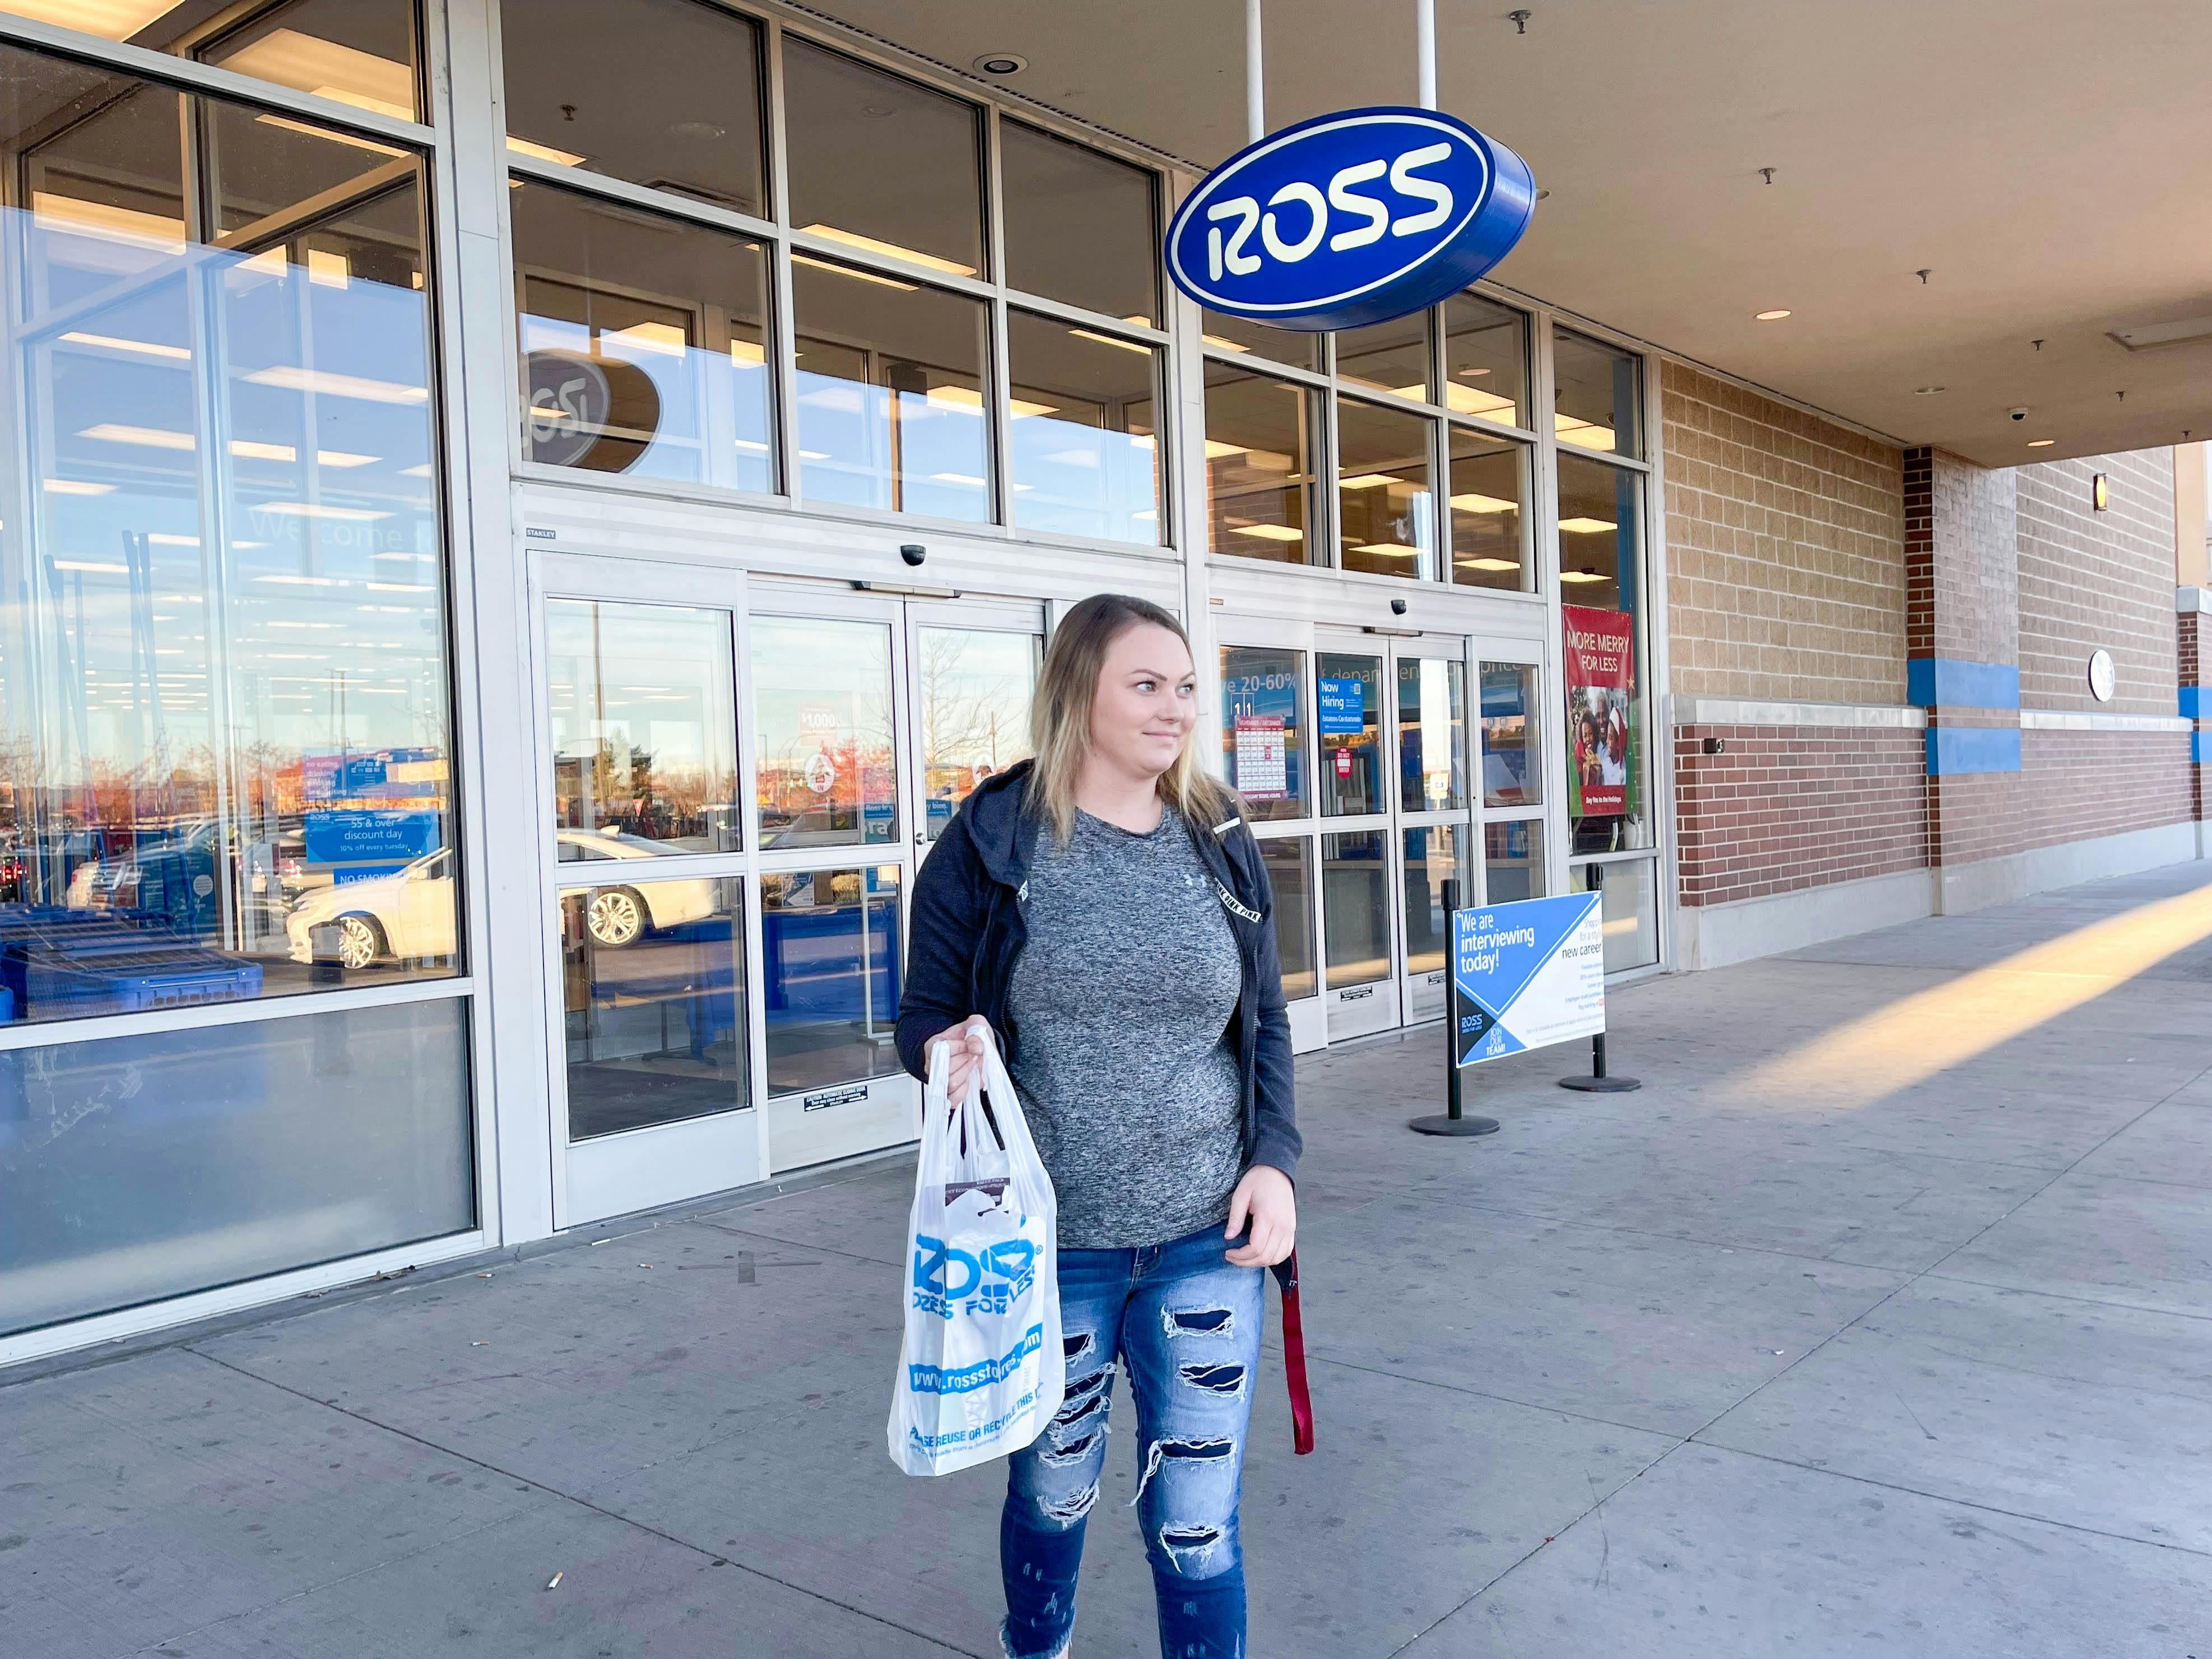 Ross Dress For Less: 20 Ways To Save More - The Krazy Coupon Lady